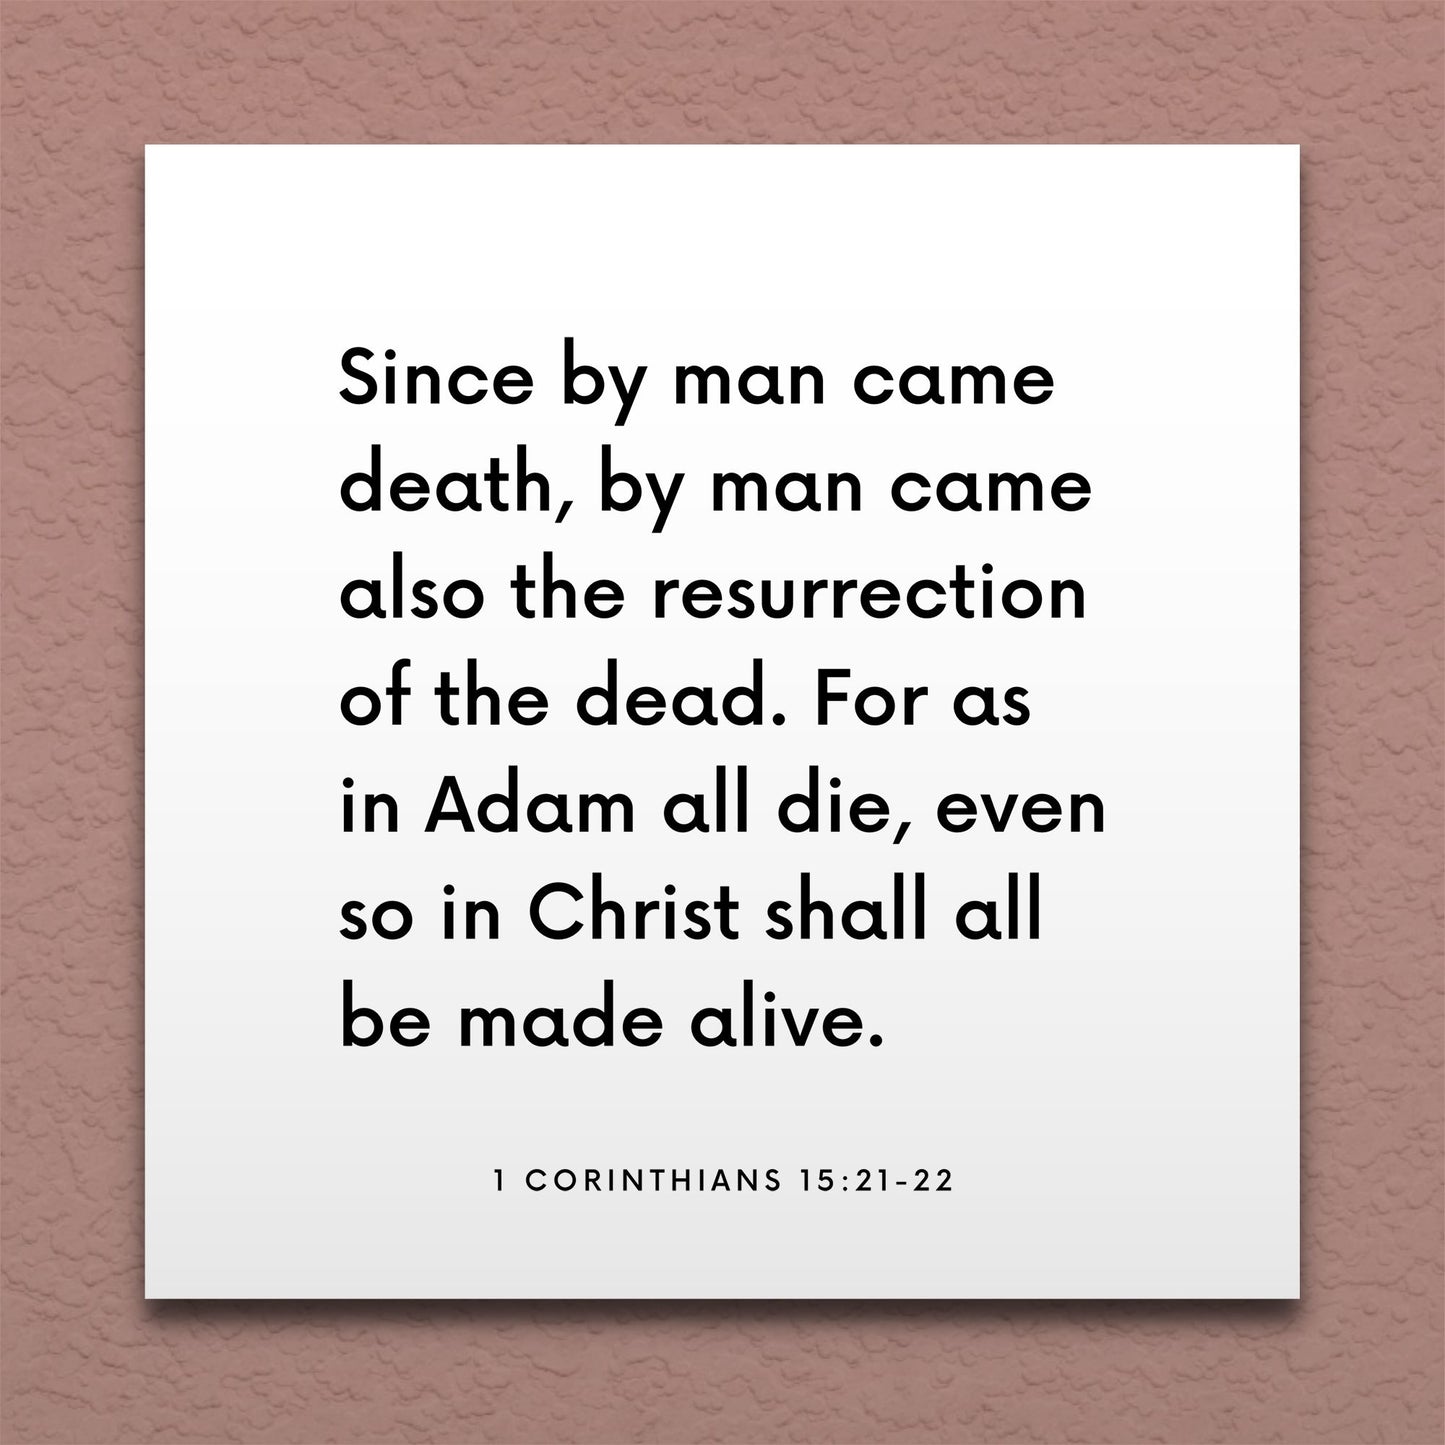 Wall-mounted scripture tile for 1 Corinthians 15:21-22 - "Since by man came death, by man came also the resurrection"